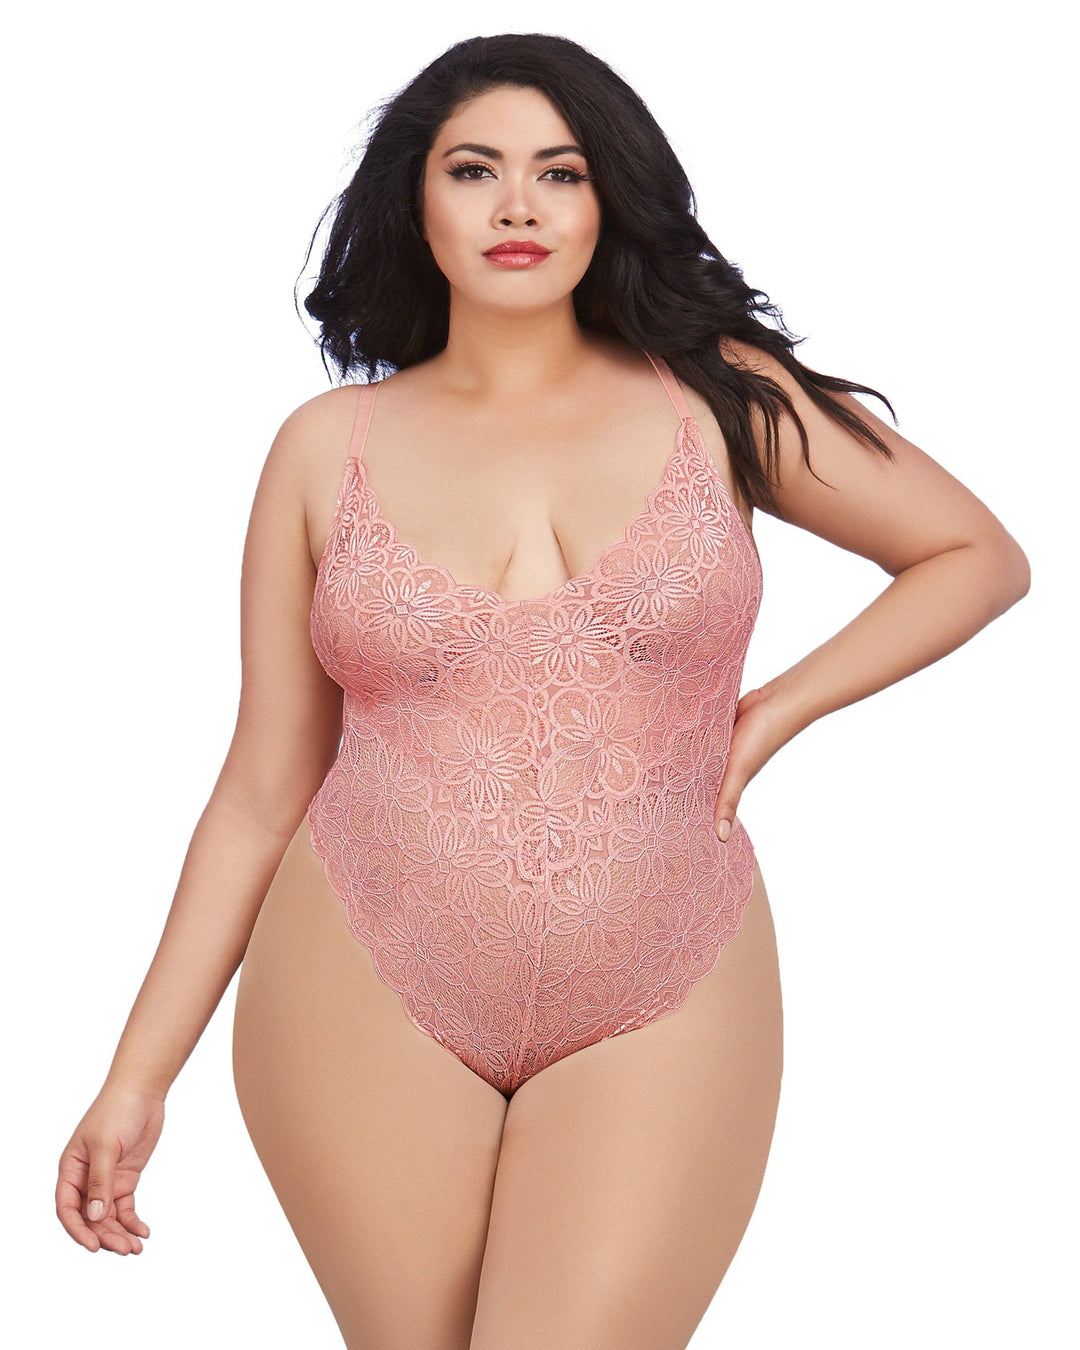 Plus Size Lace Teddy and Overskirt